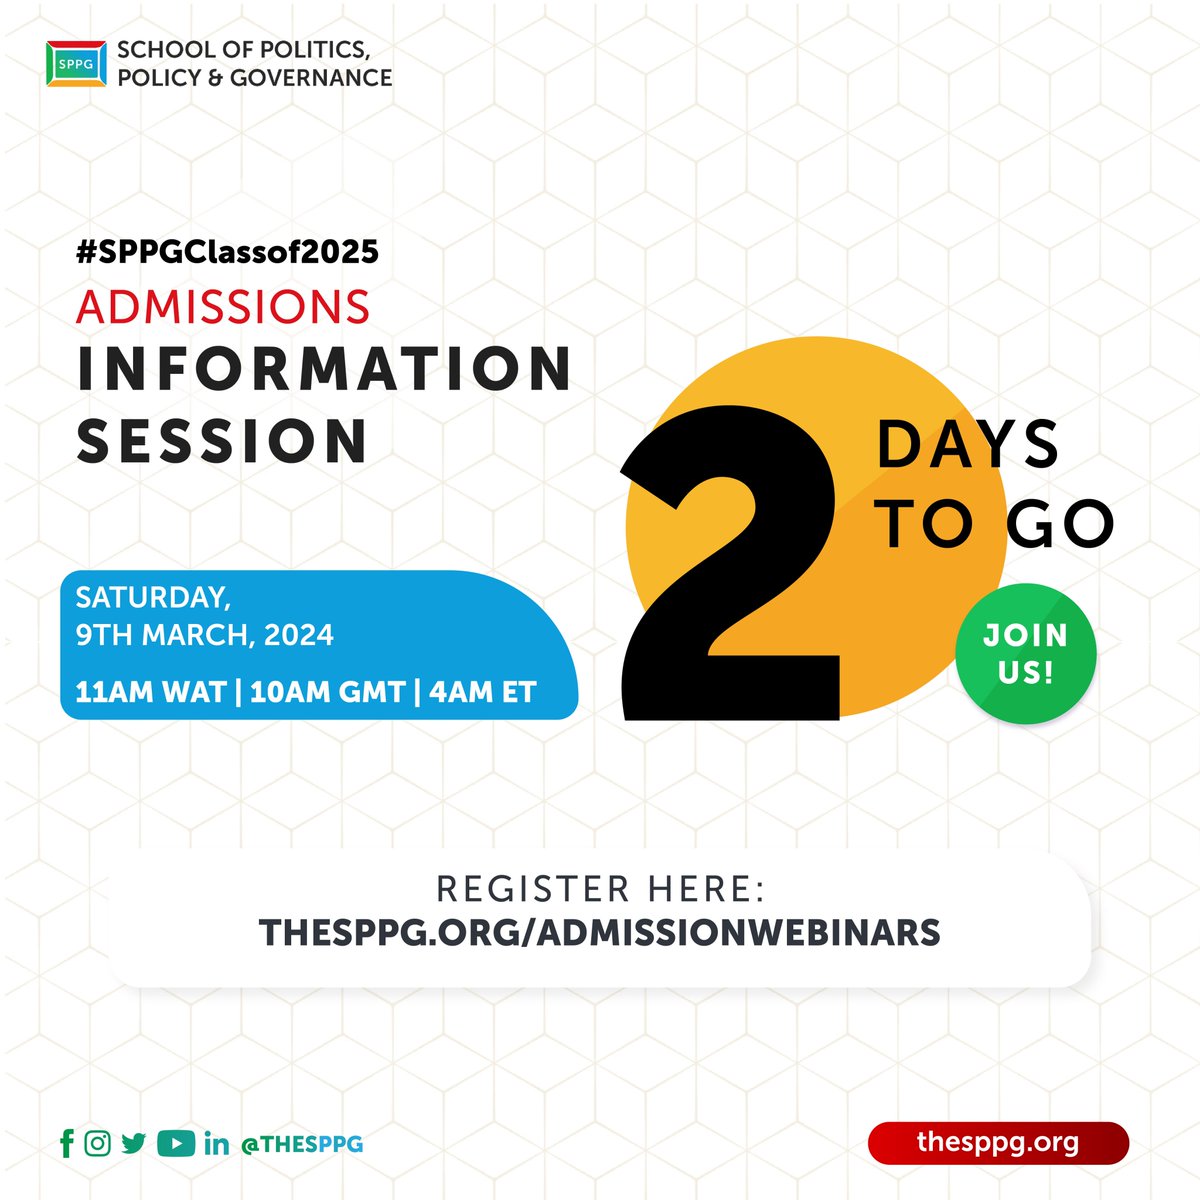 It's just 48 hours to the #SPPGClassOf2025 Admissions Webinar.

Date: Saturday, March 9, 2024

Time: 11AM WAT | 10AM GMT | 5AM ET

Admission into the SPPG is highly competitive through a rigorous virtual selection process.

Come and learn all you need to know about the School of